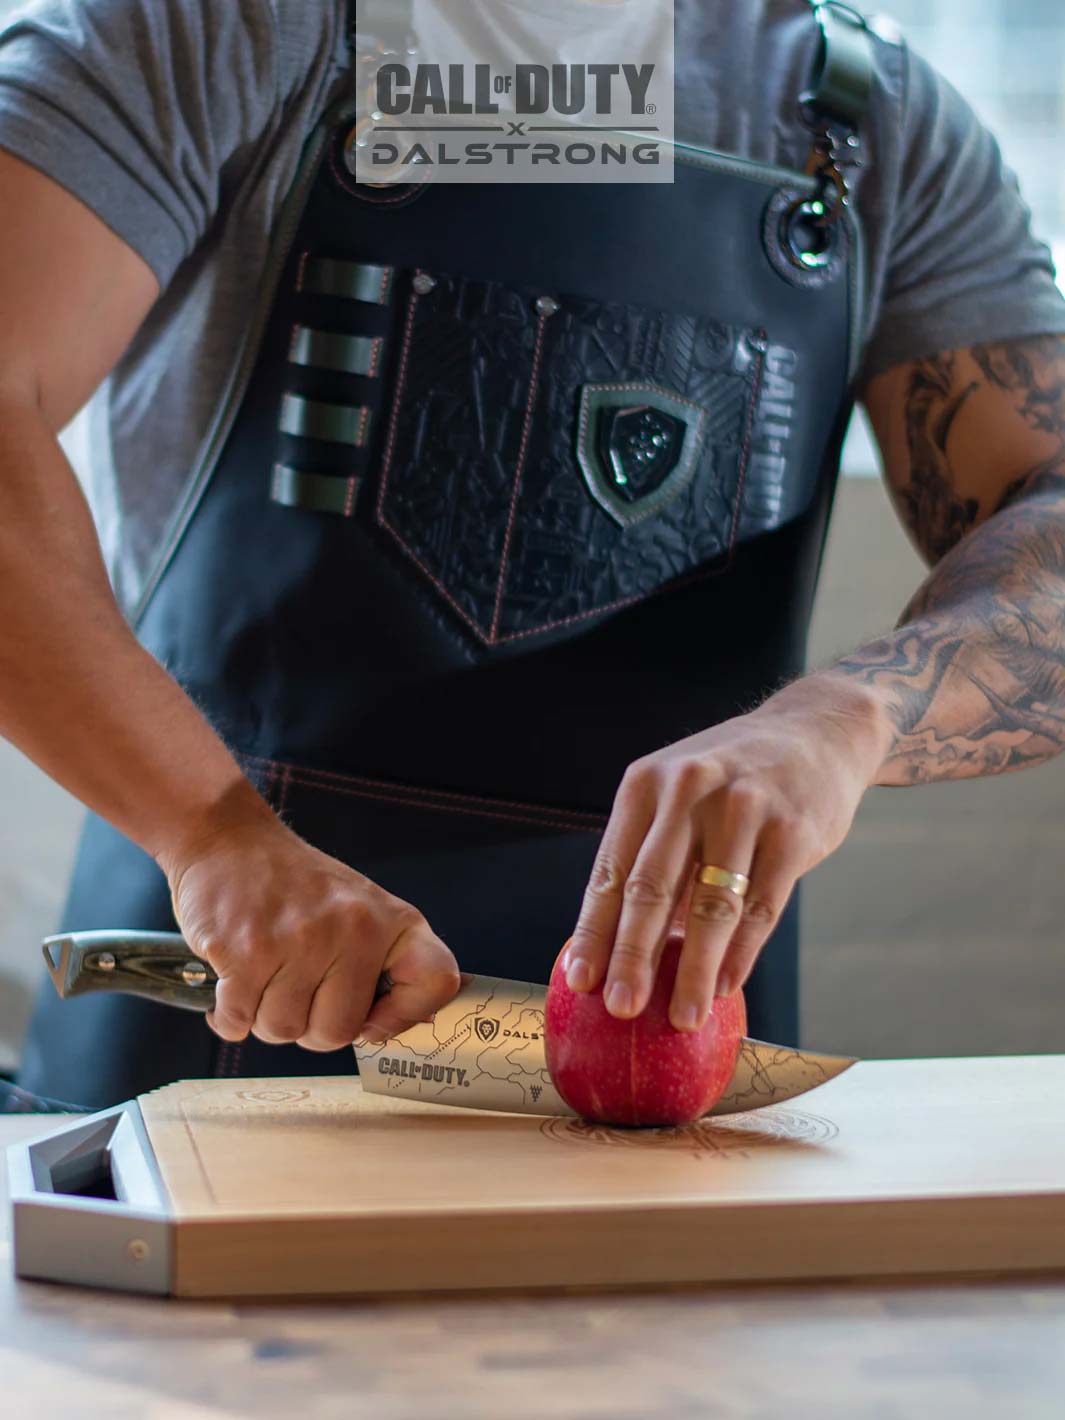 Dalstrong call of duty limited edition chef leather apron with an apple and cutting board.